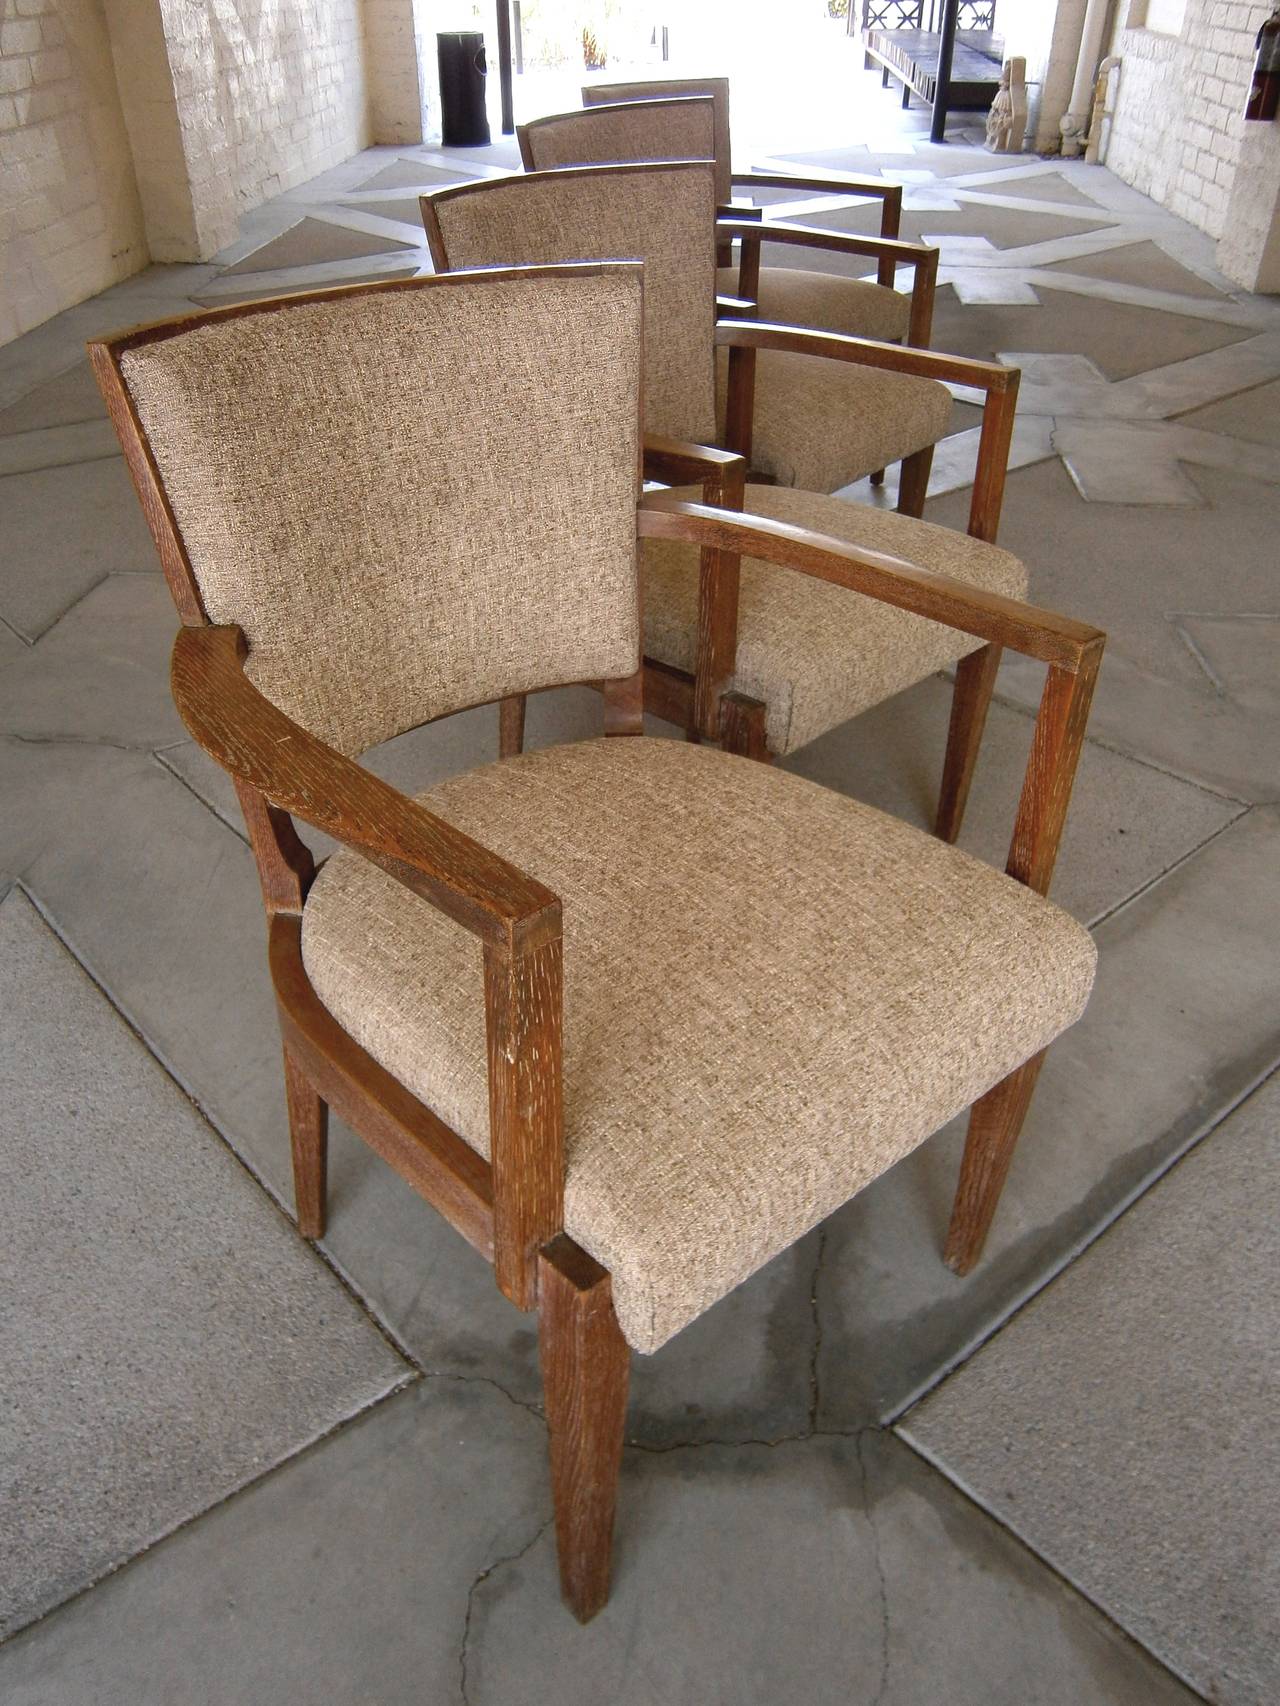 A chic set of 4 French Art Modern period cerused oak armchairs from the 1940s. This set exudes quality and sophistication without any over-adornment to the minimalist design. The shield-shaped back of the chair has a low-rise, with the seat being